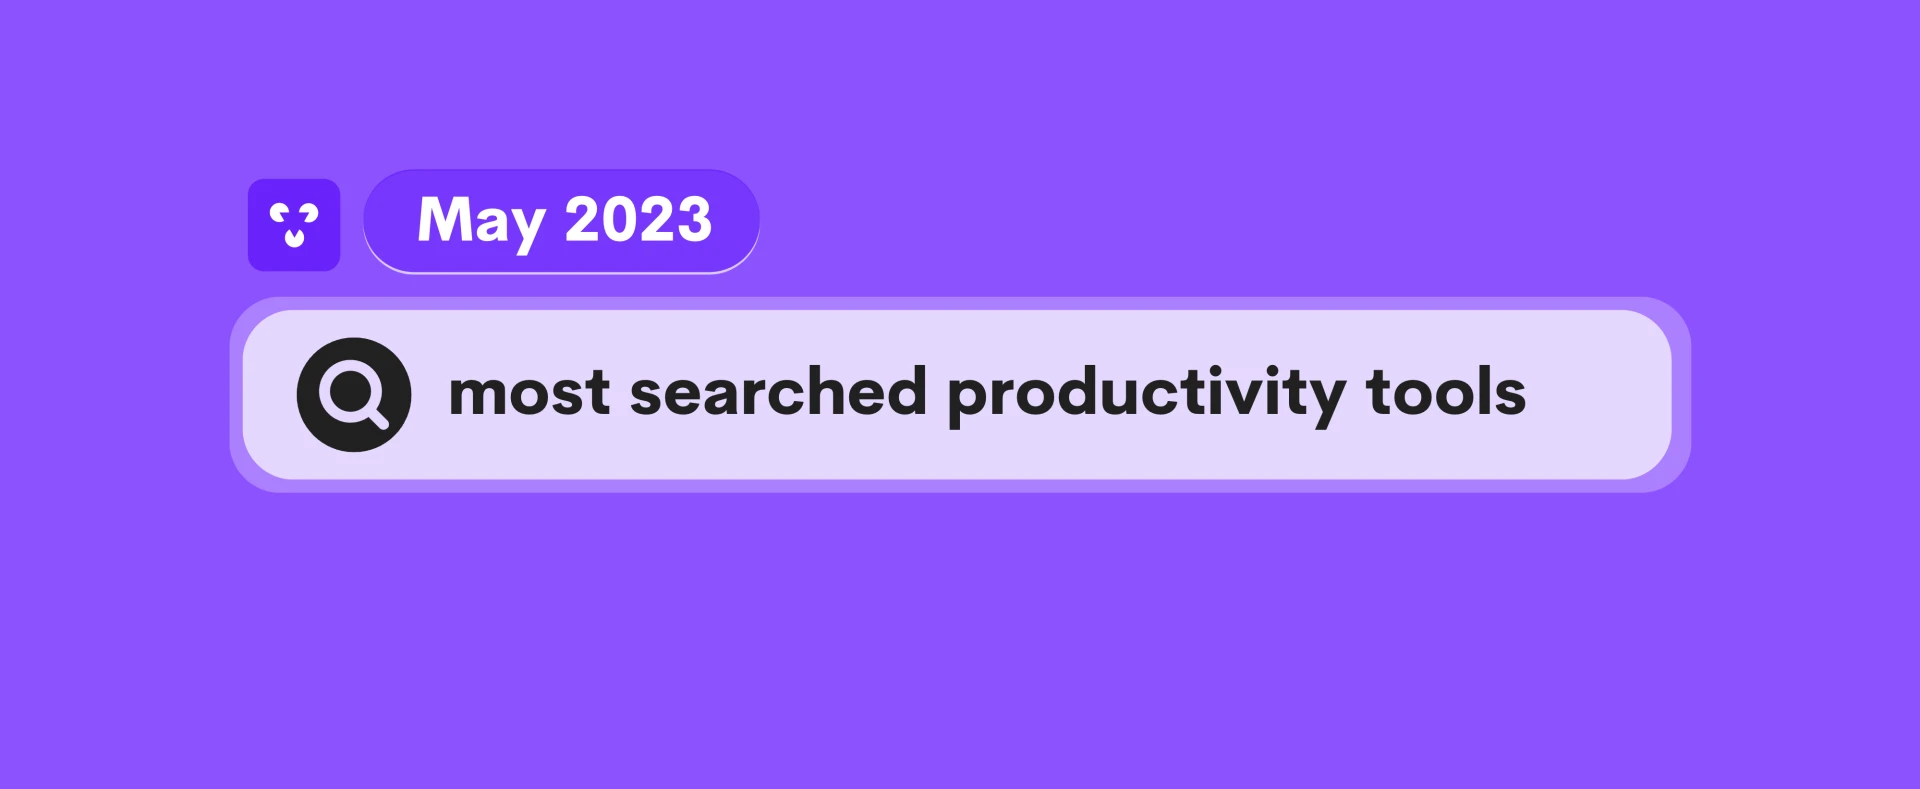 Most Search Productivity Tools - May 2023